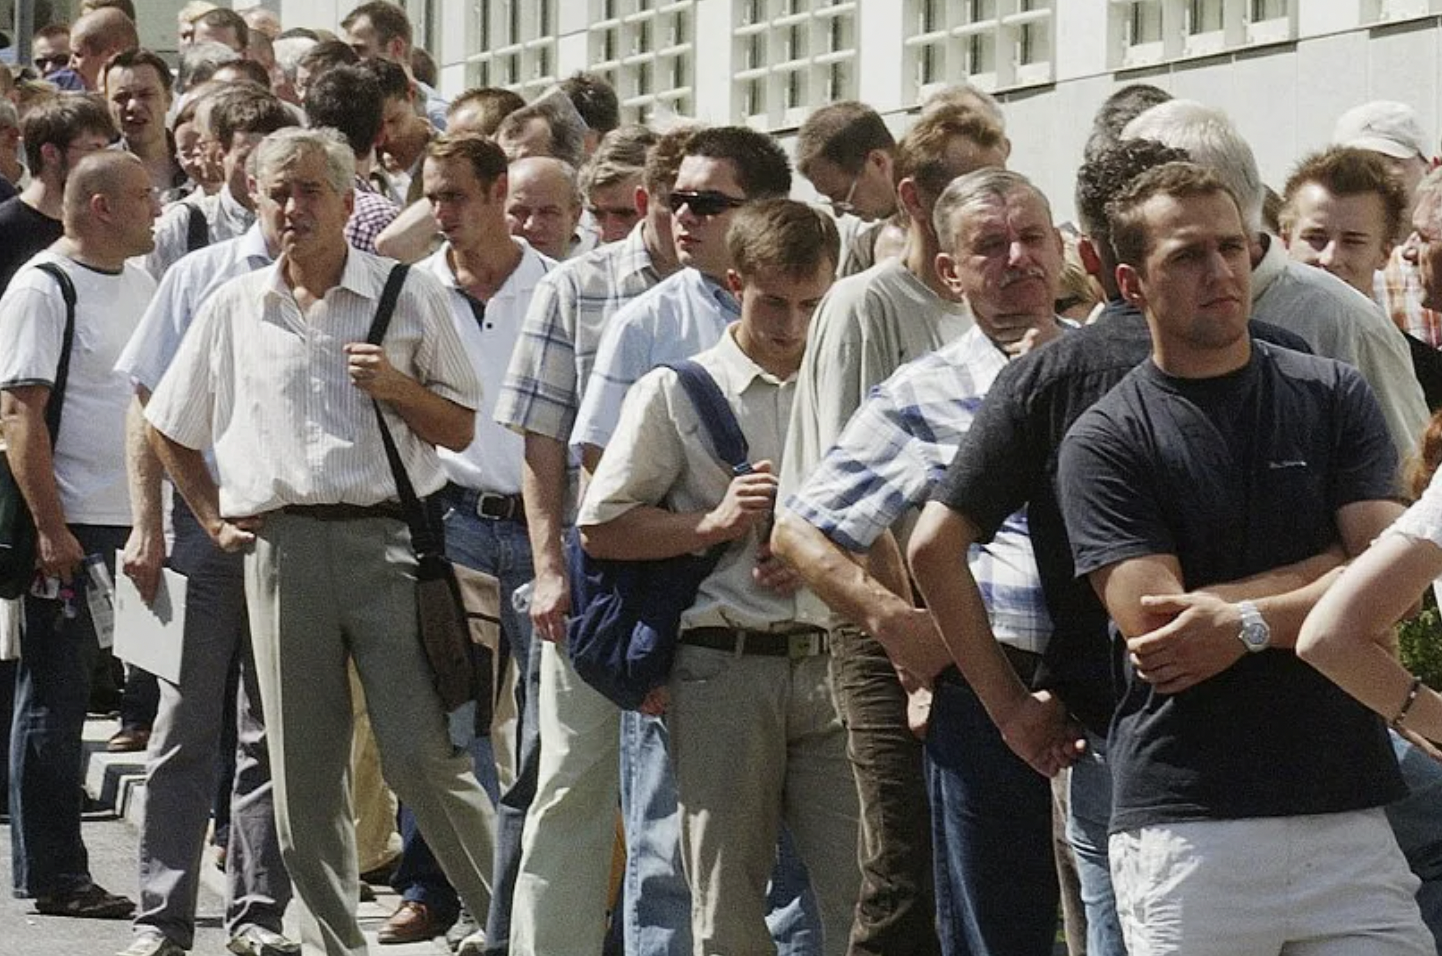 Lots of men in the line on the street | Source: Pexels